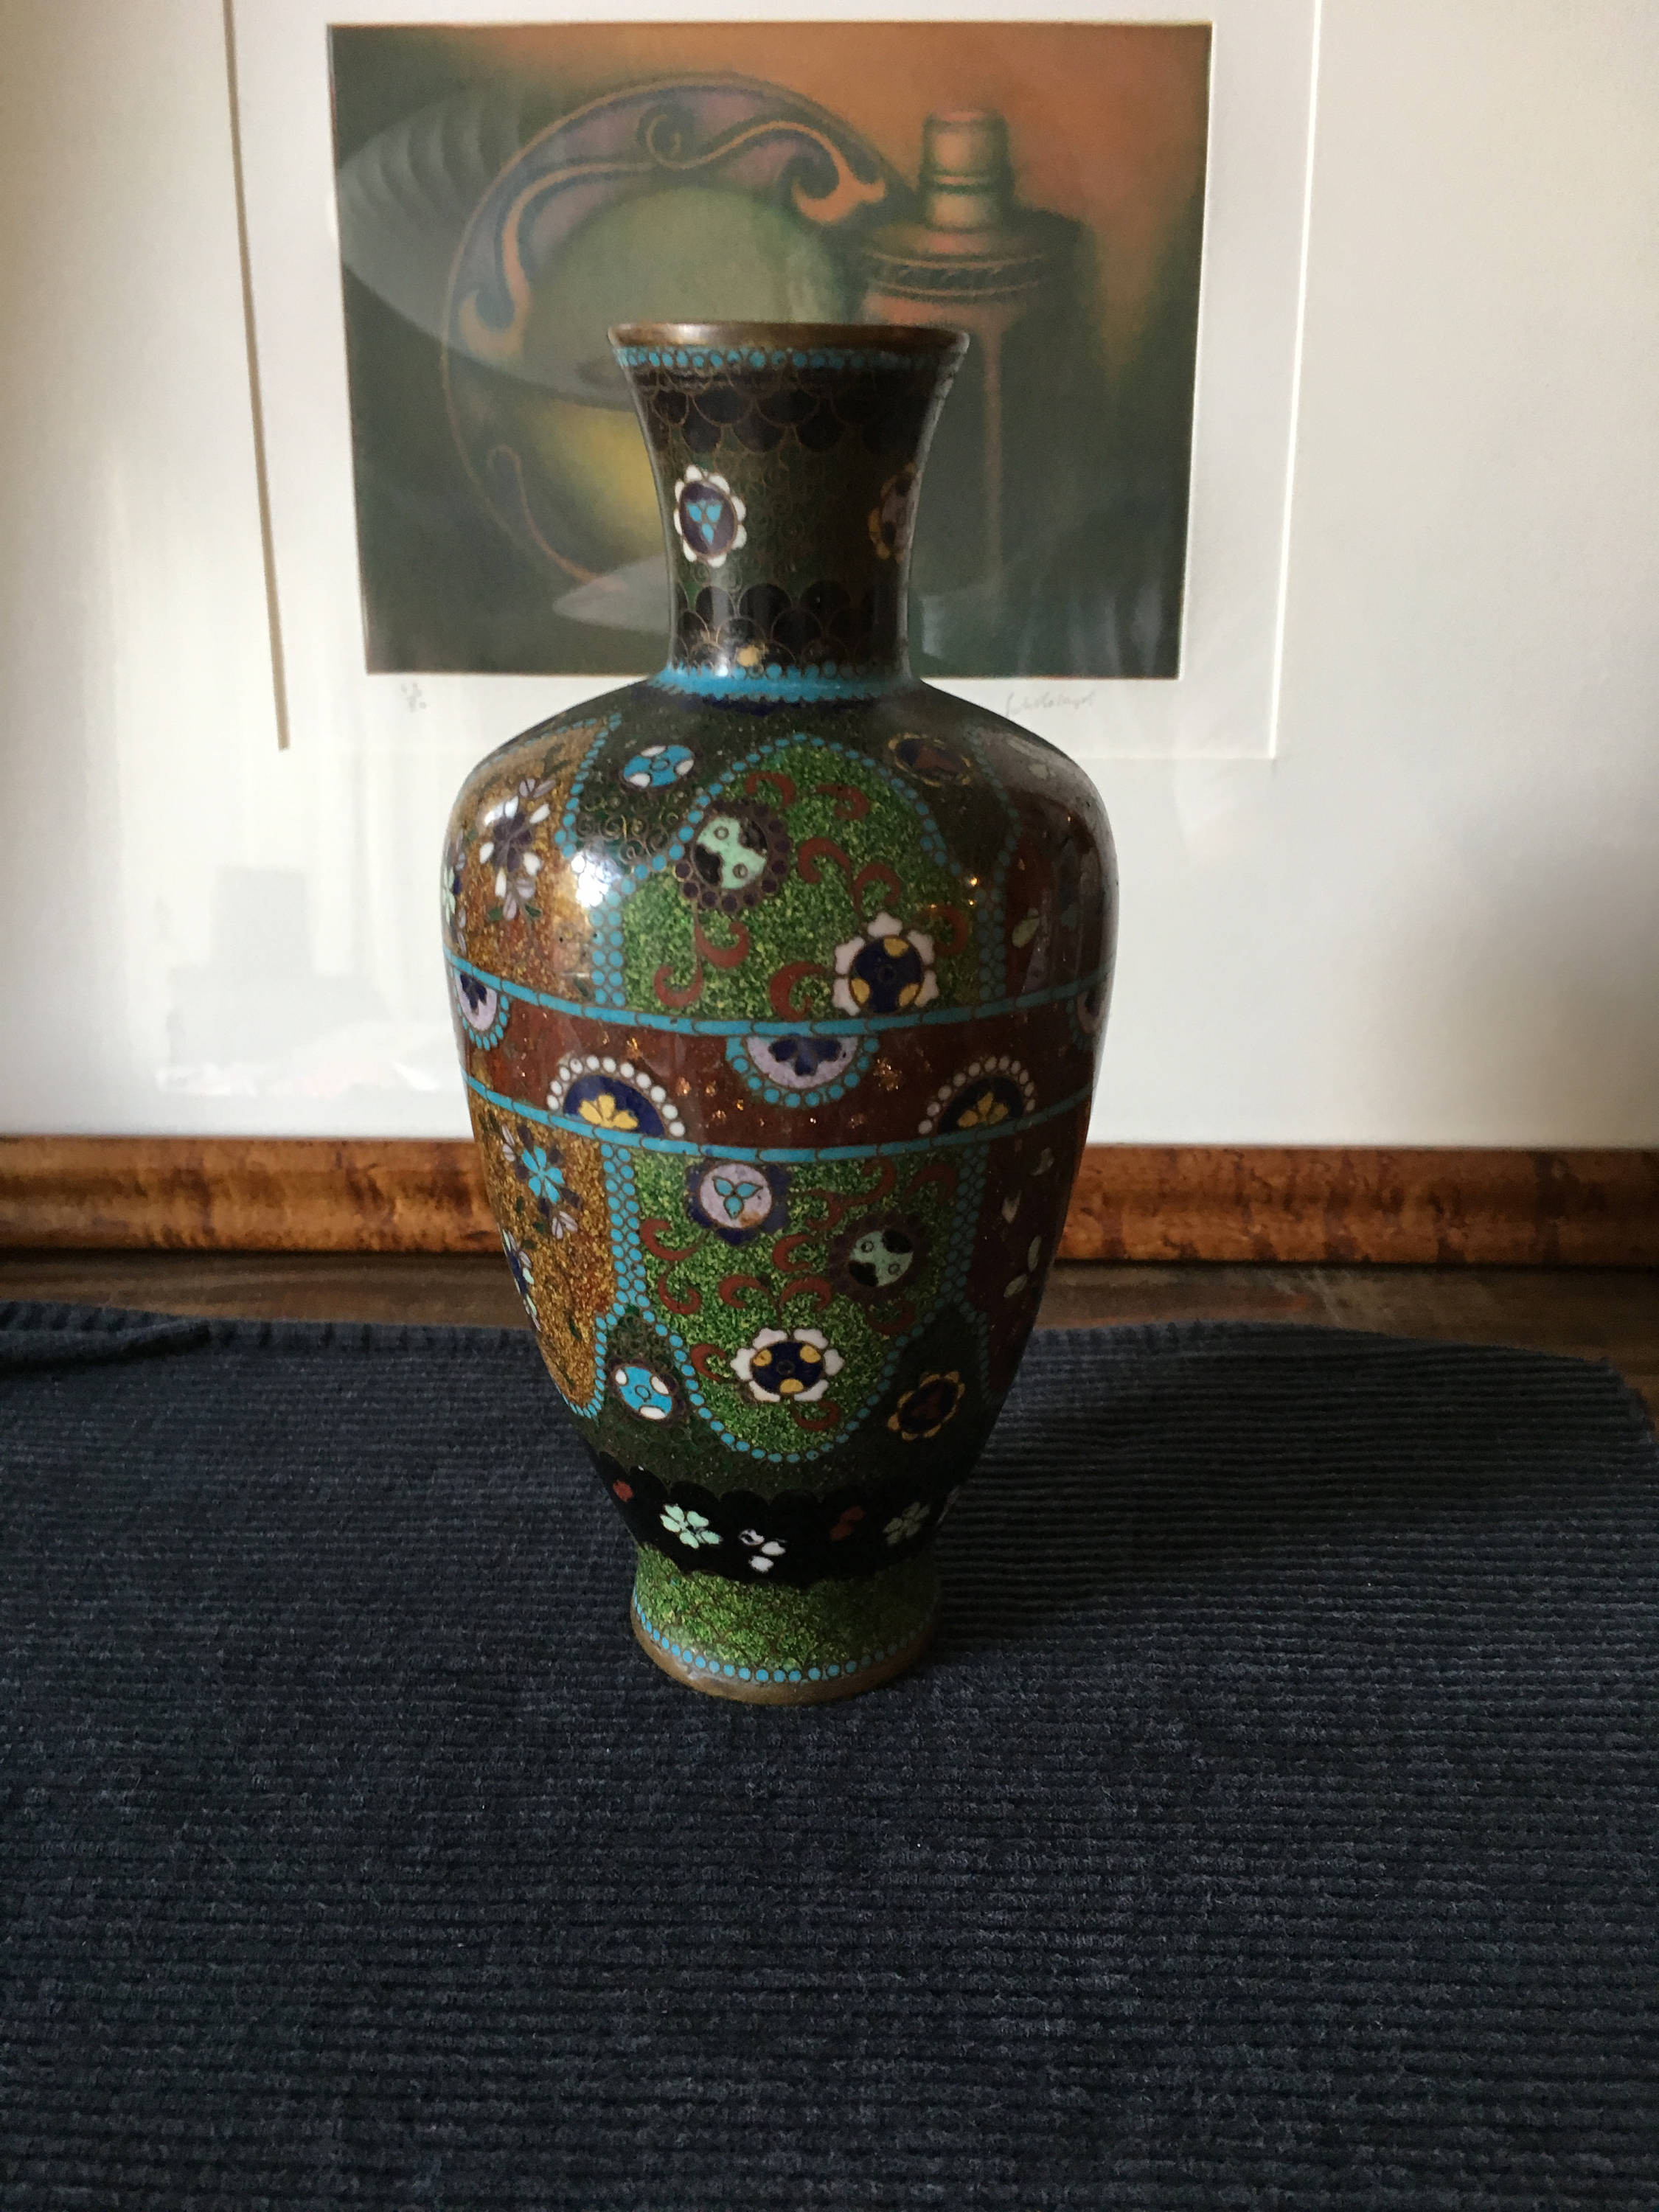 23 attractive Large Glass Urn Vase 2024 free download large glass urn vase of meiji period japanese cloisonna vase etsy within dc29fc294c28ezoom